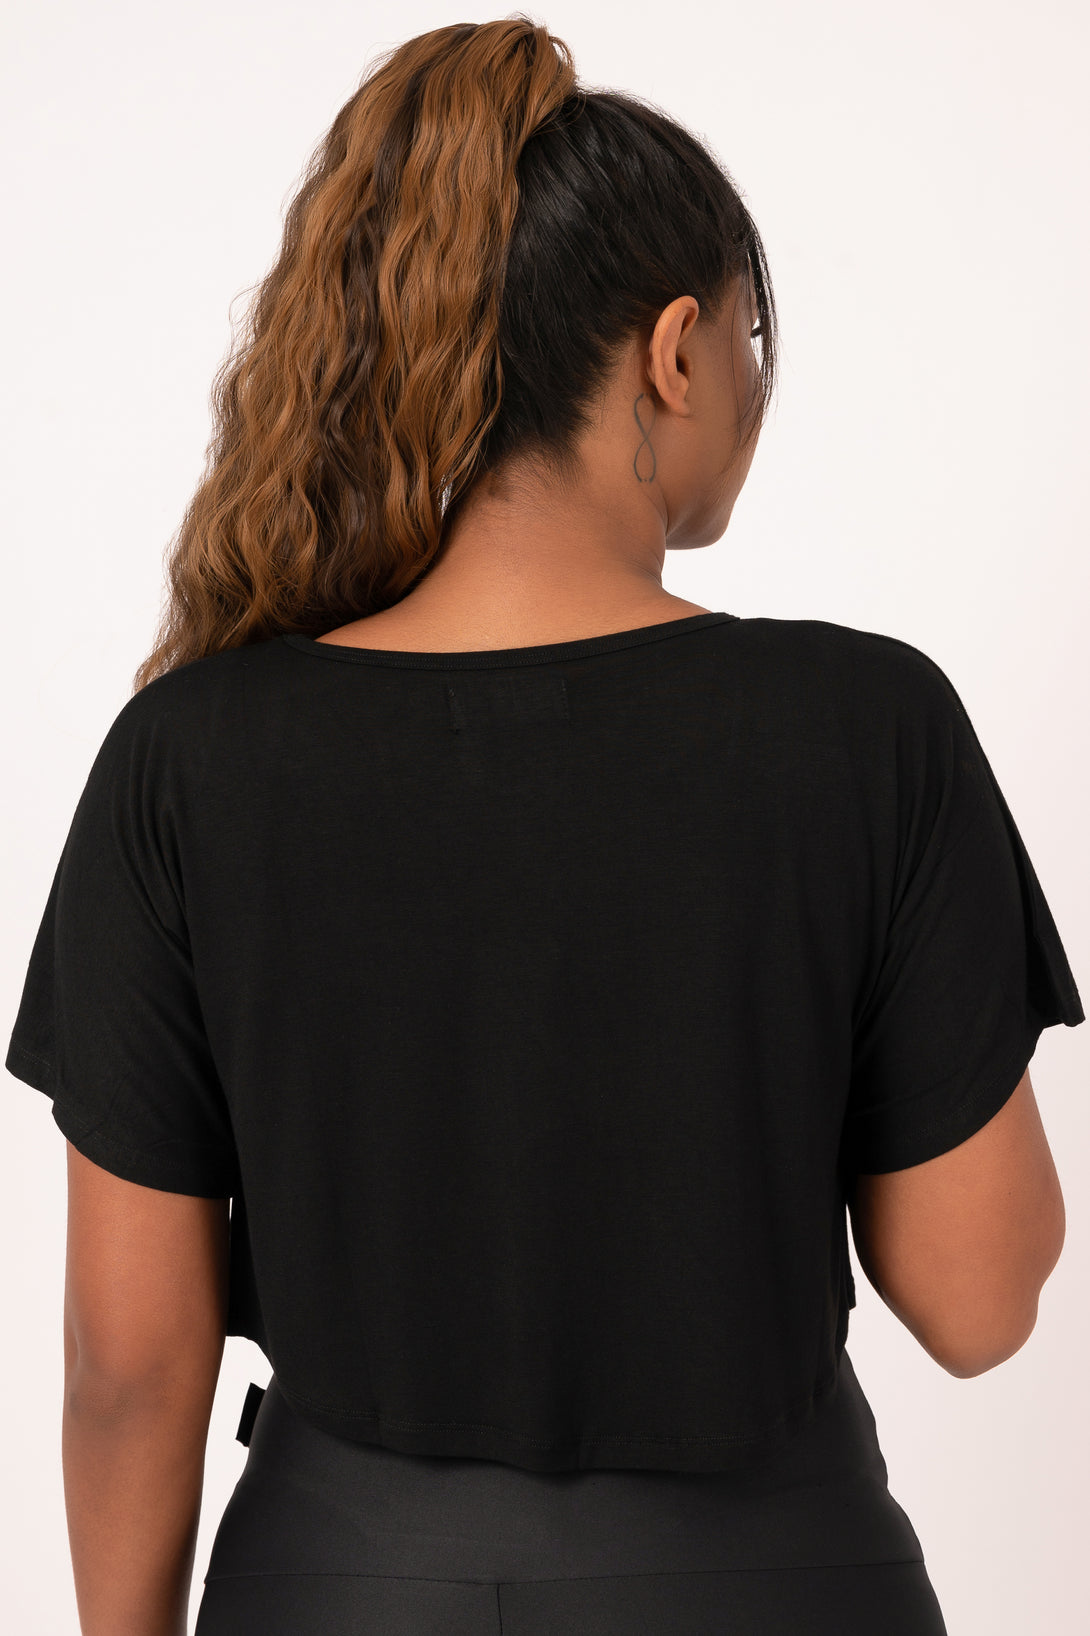 Black Slinky To Touch - Exotica Cropped Tee - Exoticathletica